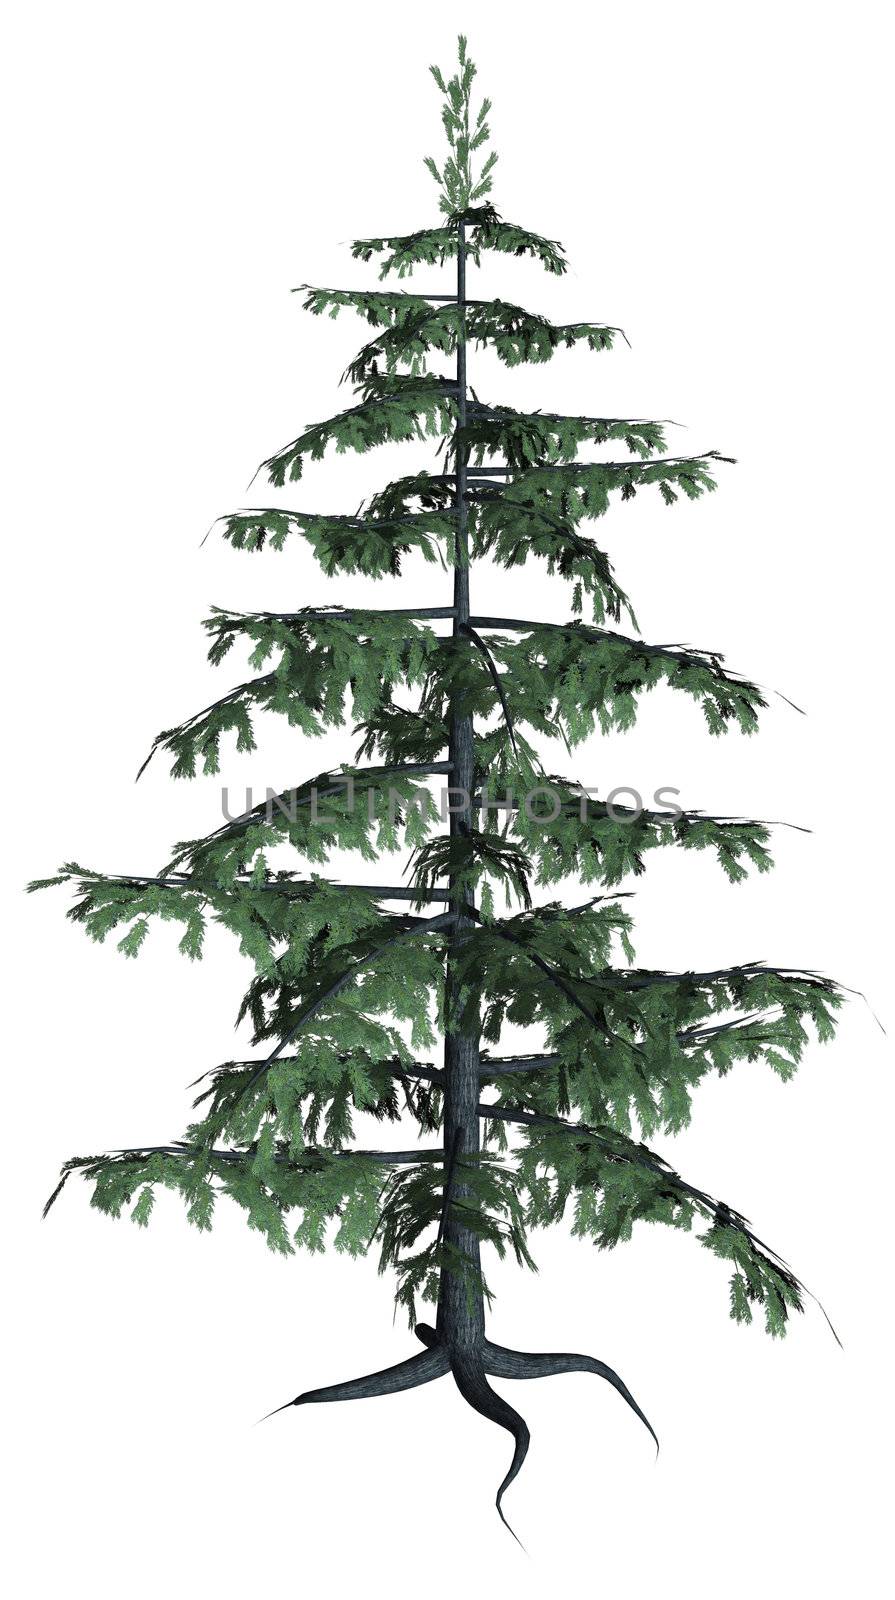 Full Pine tree on a white background